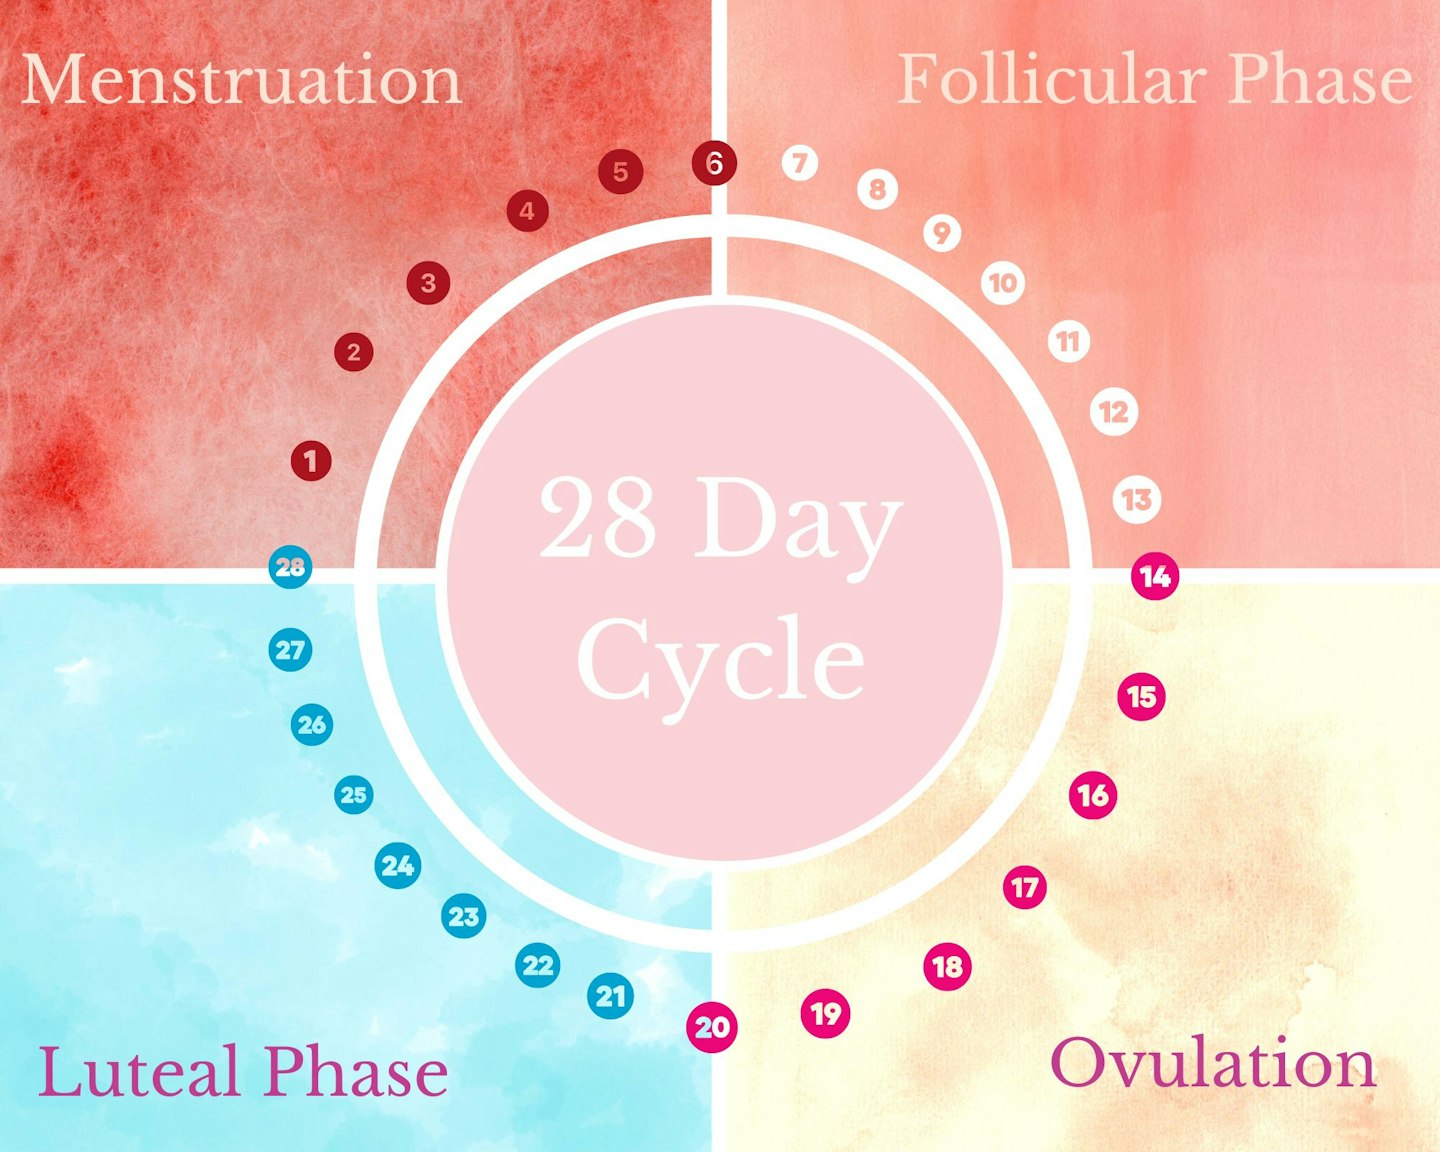 Can You Get Pregnant a Week After Ovulation?